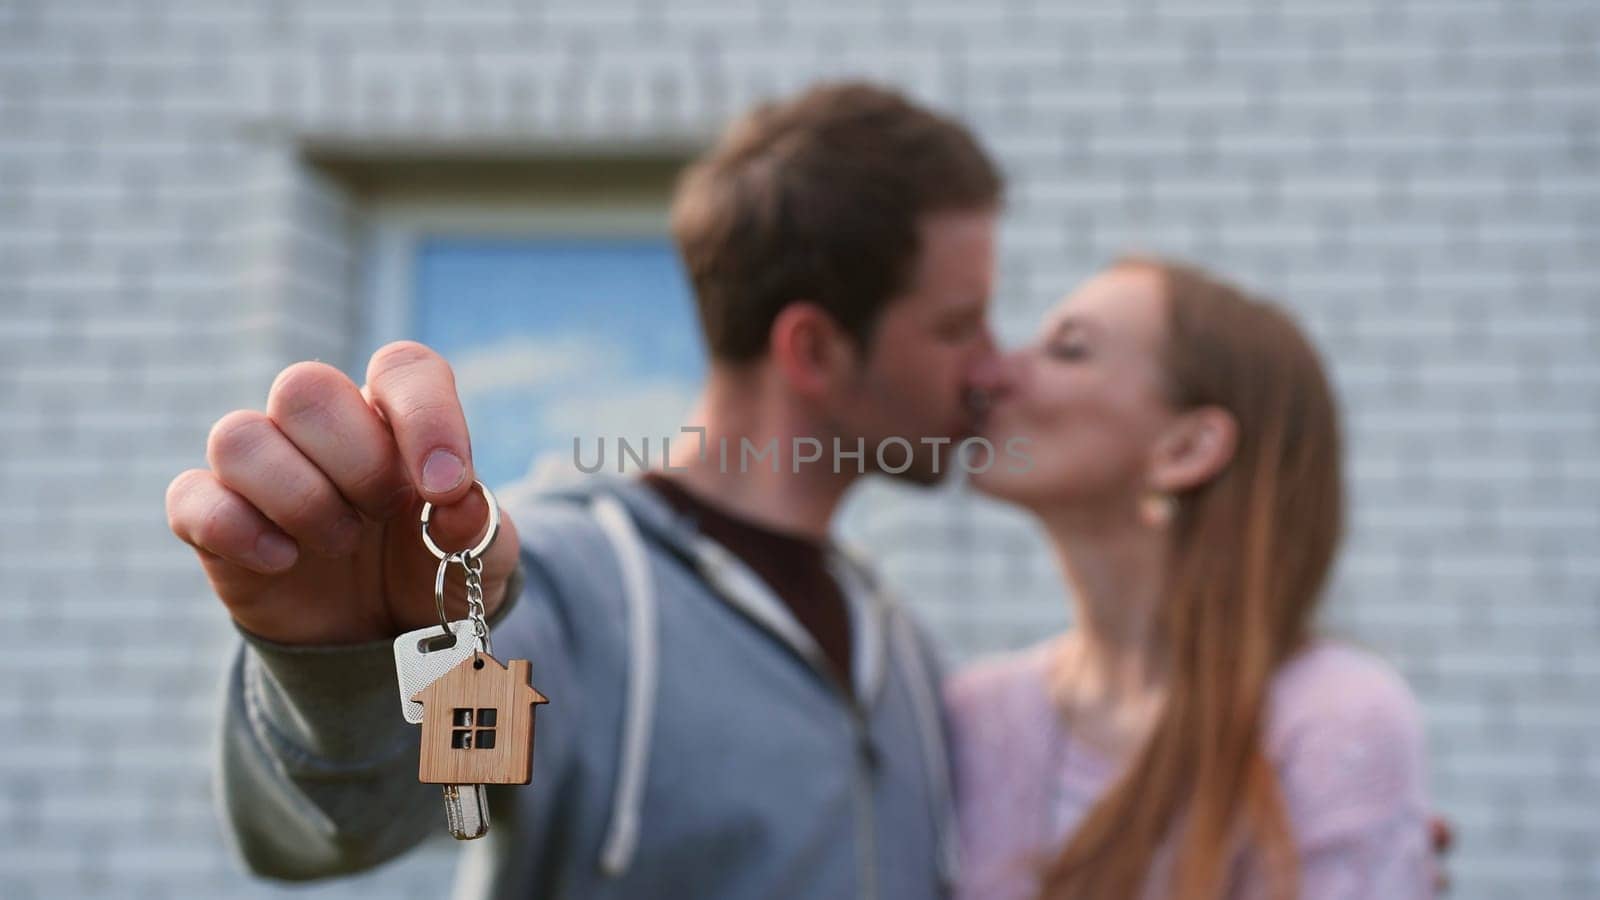 Real estate purchase concept. Young spouses show off the keys to the purchased new home and kiss